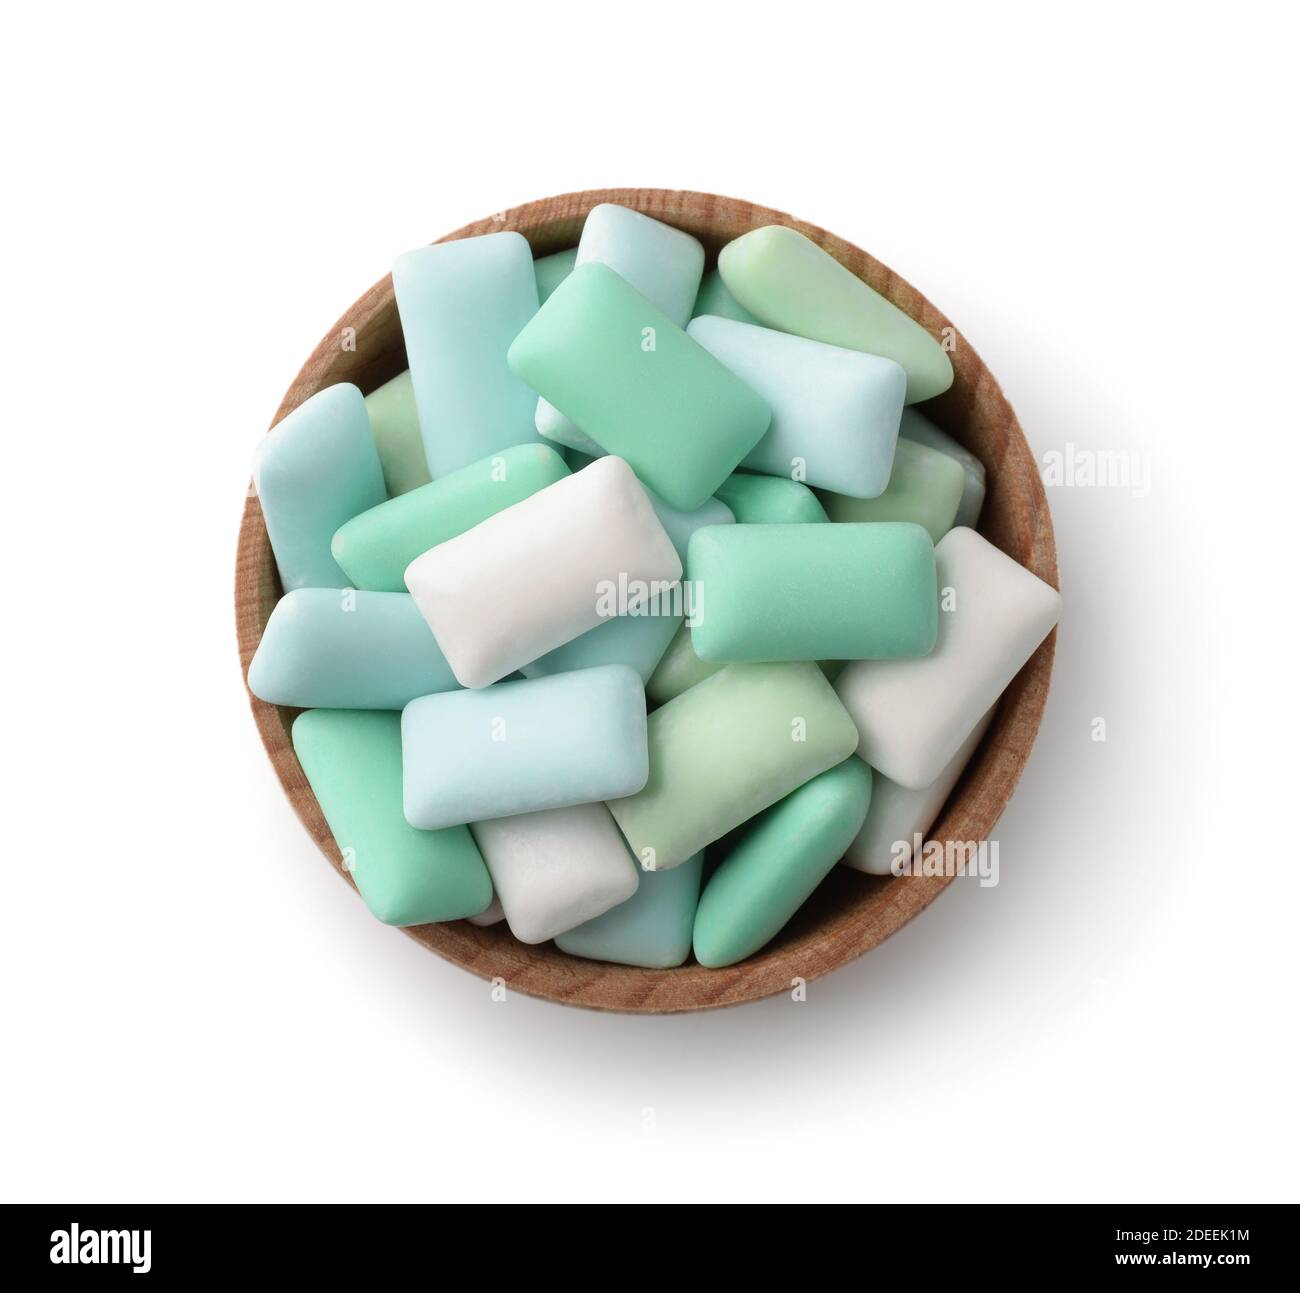 Top view of wooden bowl with mint chewing gum pieces isolated on a white Stock Photo